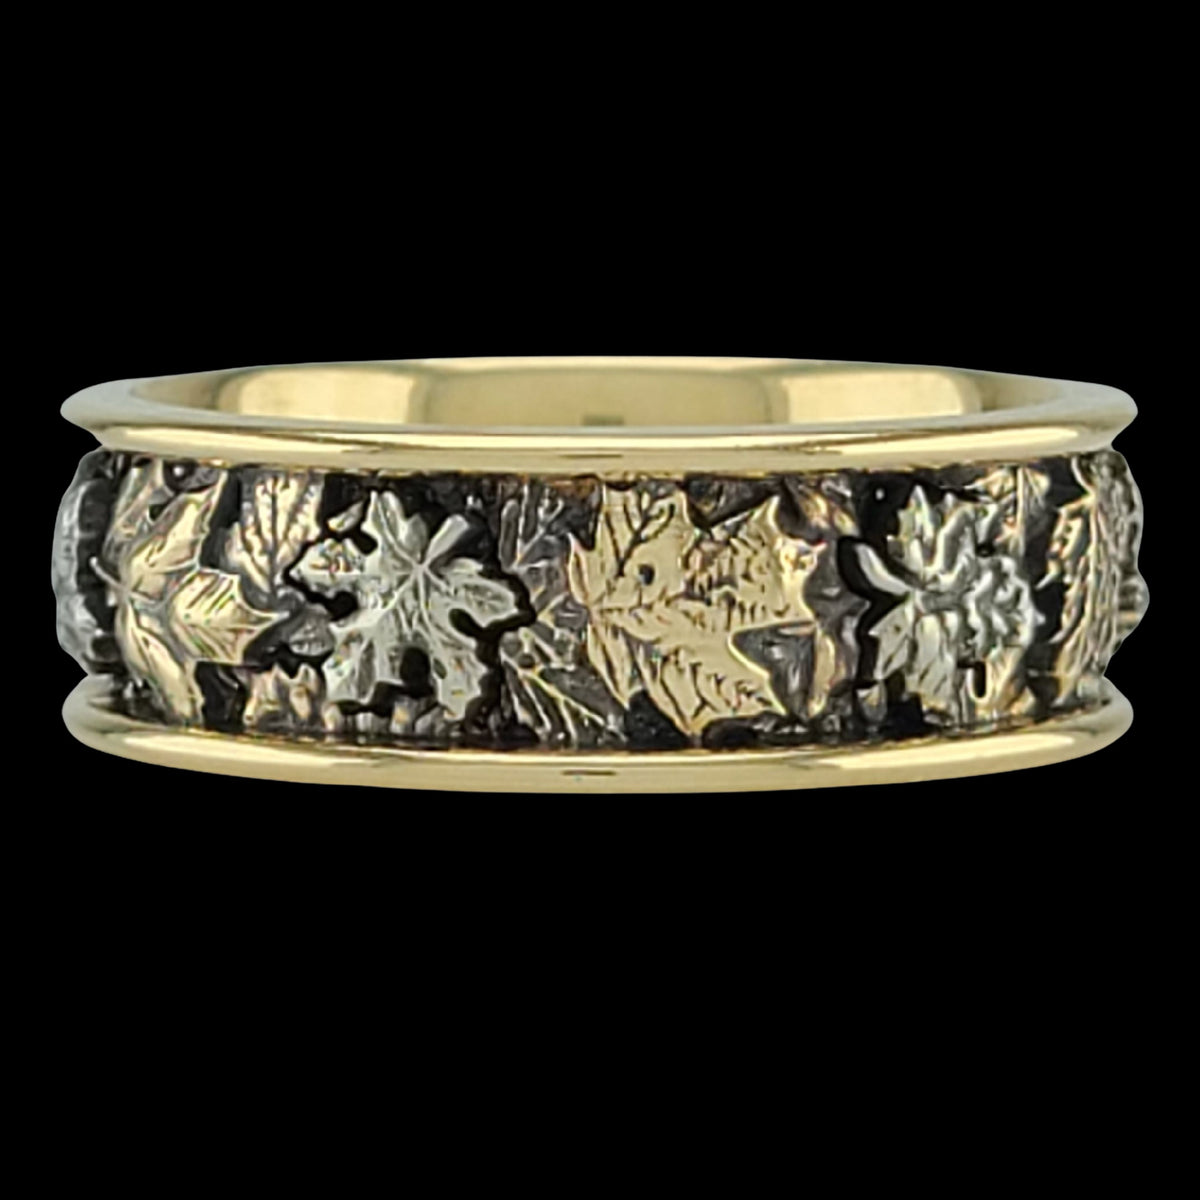 AUTUMN MAPLE TREE LEAVES BAND RING 2-TONE - Starting at $599